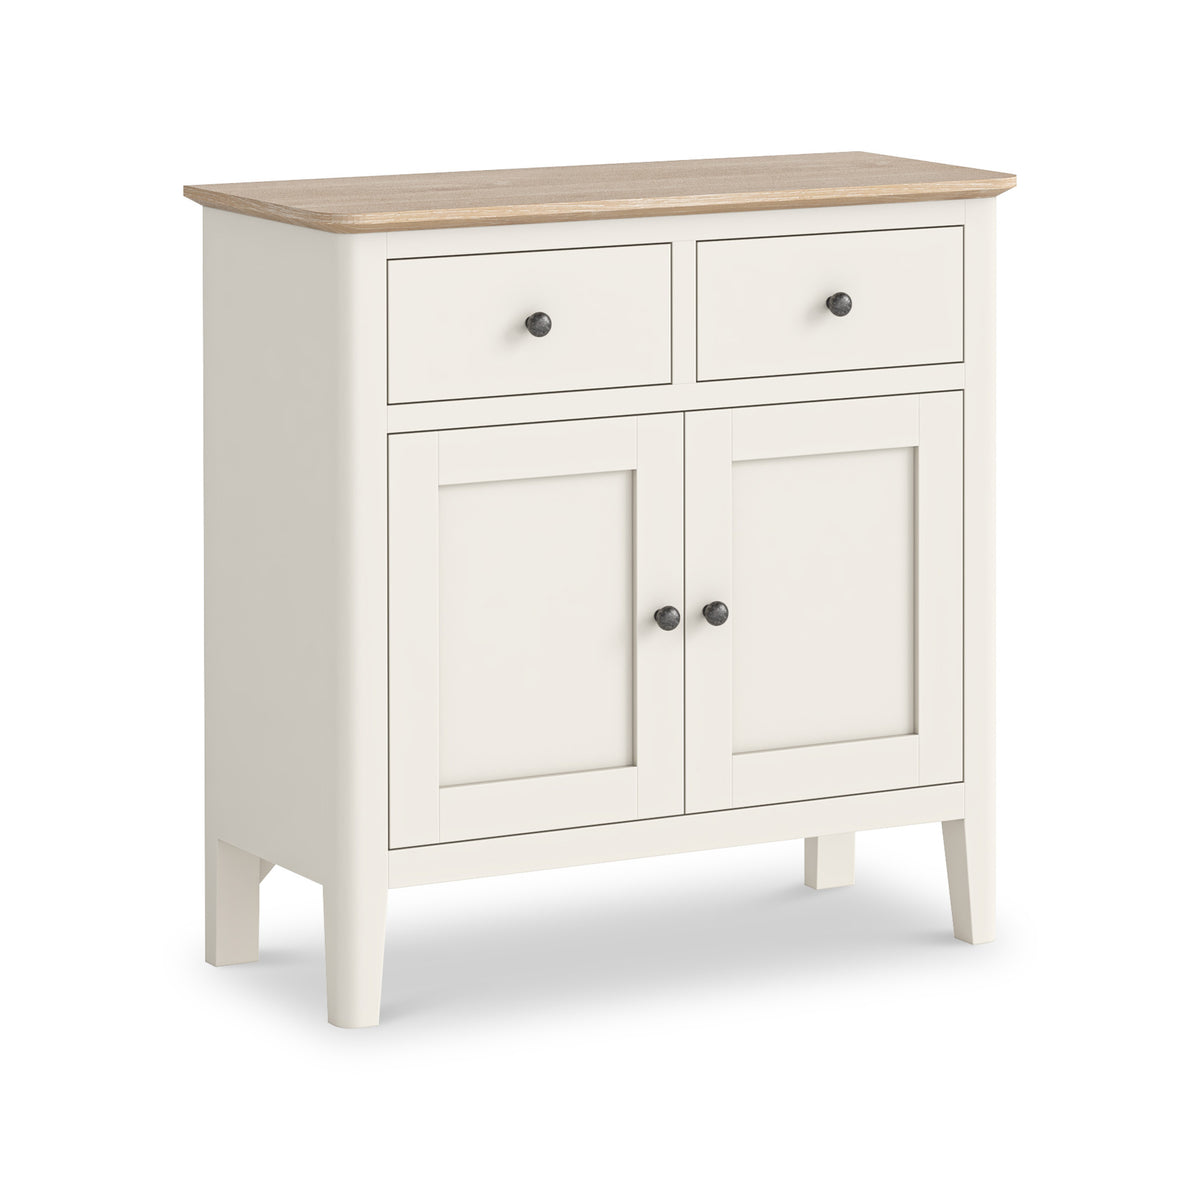 Penrose Coconut White Mini Sideboard with metal handles from Roseland Furniture